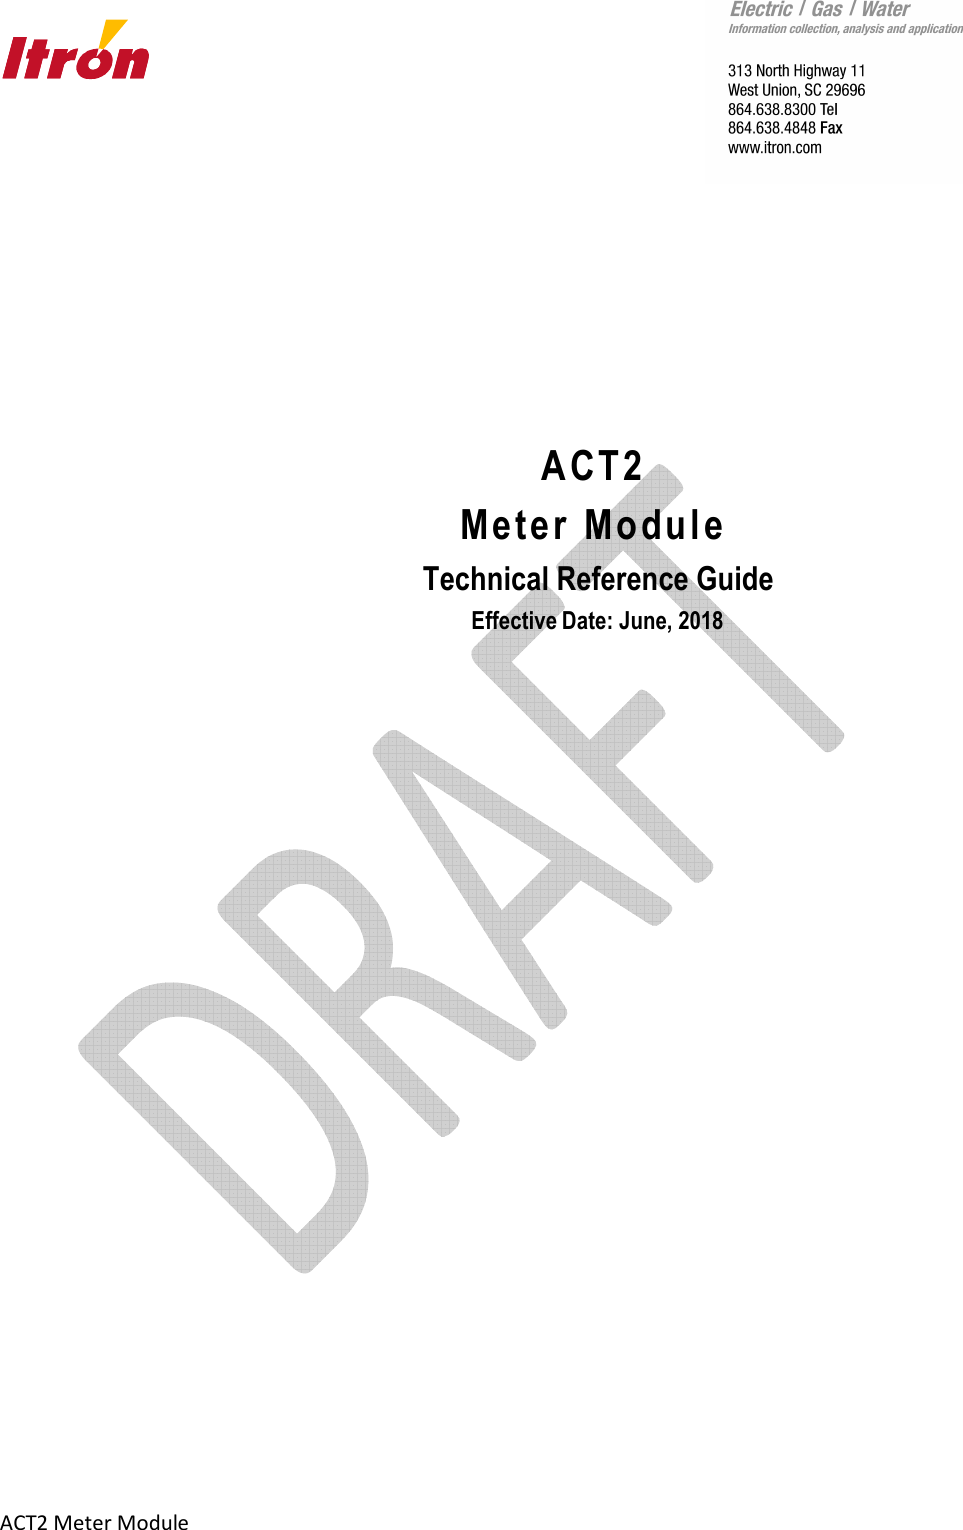       ACT2 Meter Module             ACT2 Meter Module  Technical Reference Guide  Effective Date: June, 2018     